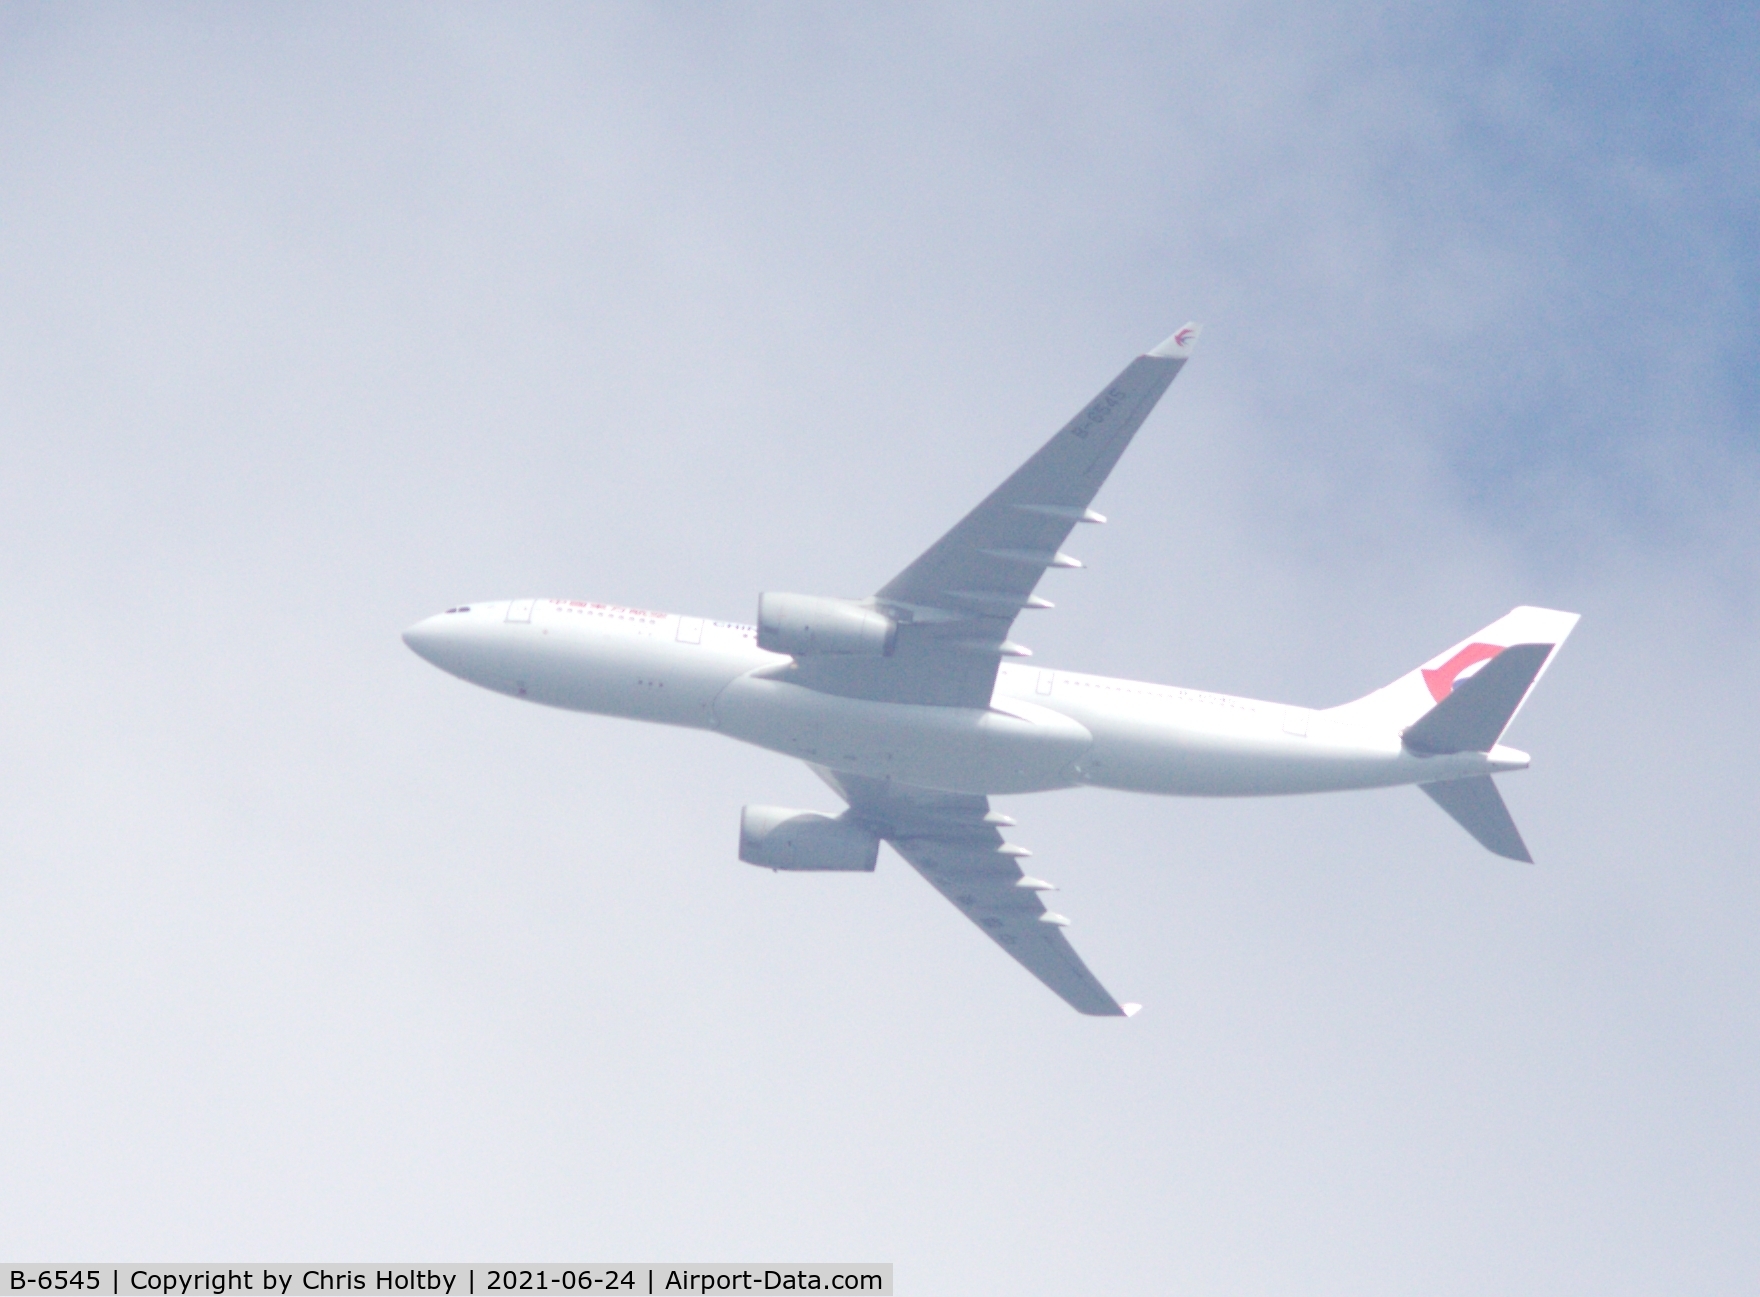 B-6545, 2011 Airbus A330-243 C/N 1291, Back in China Eastern Airlines livery over Potters Bar, Herts